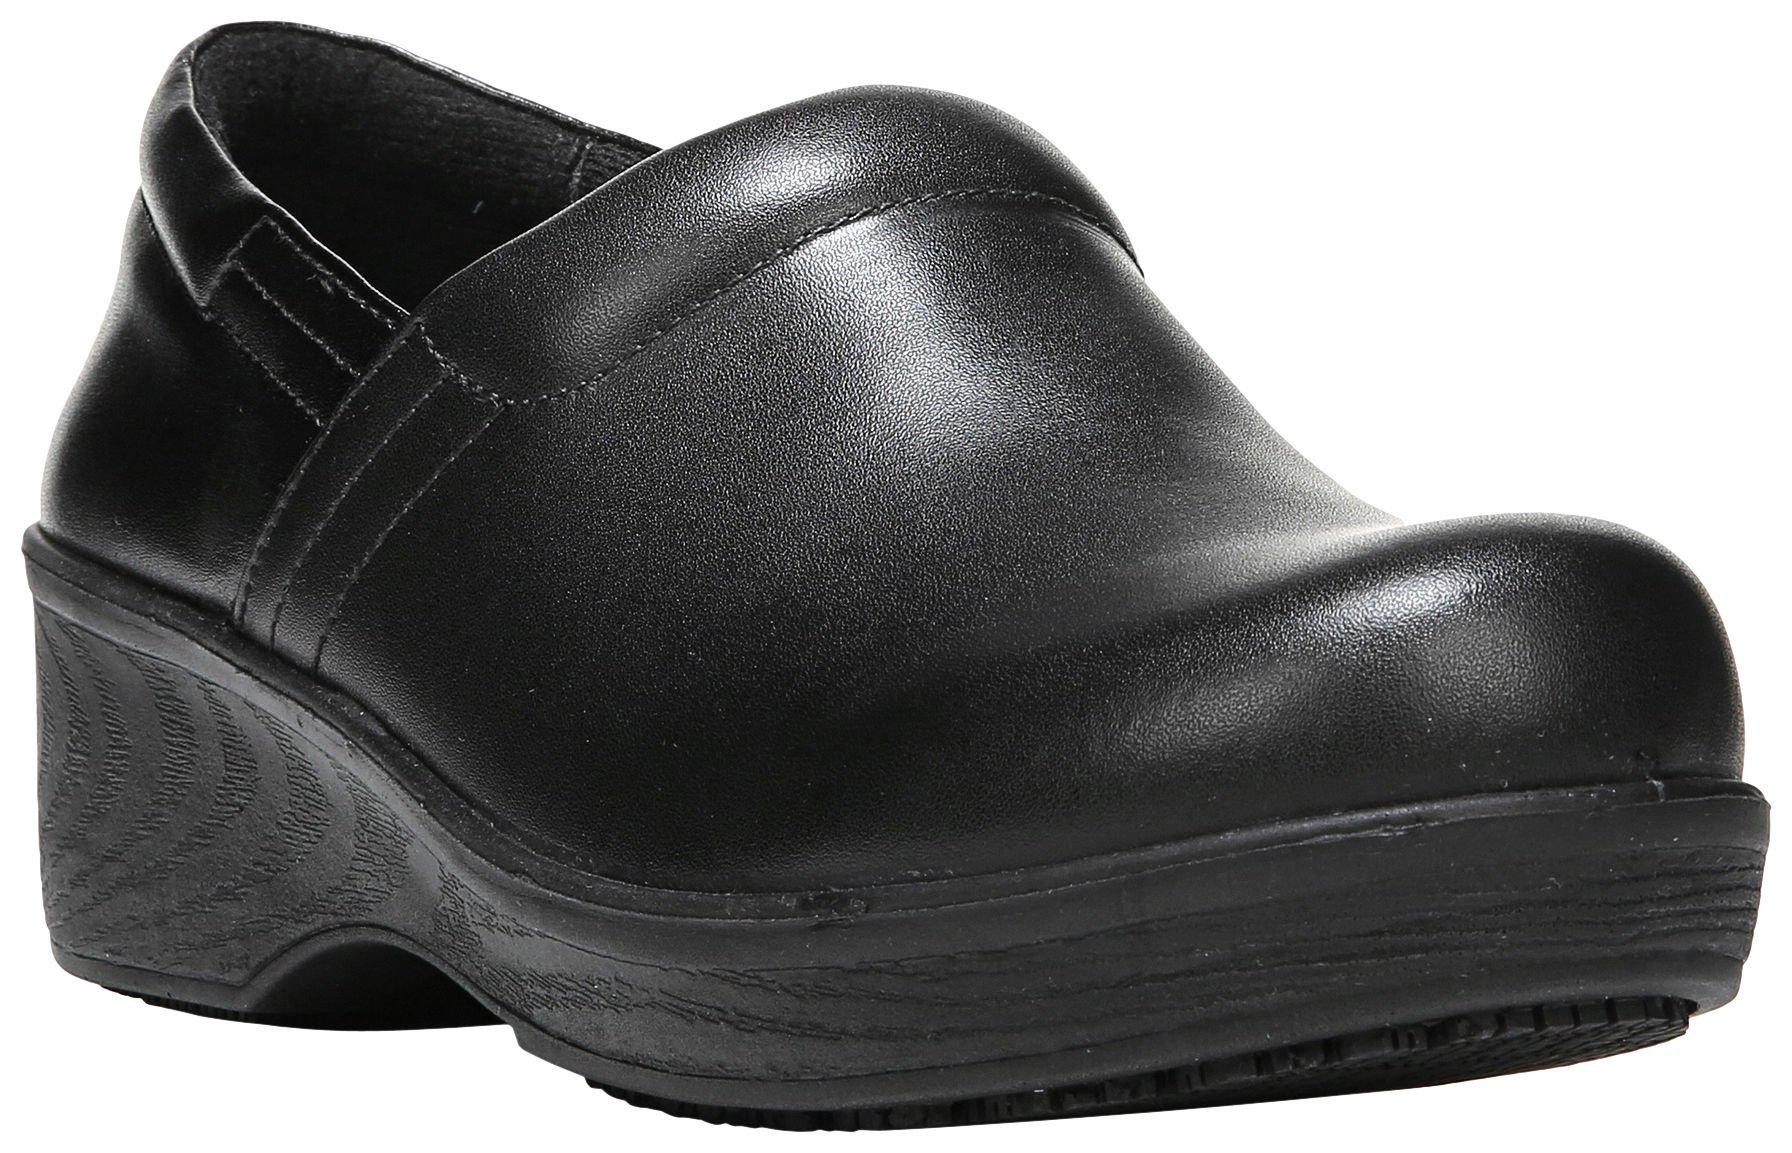 doctor scholl's work shoes